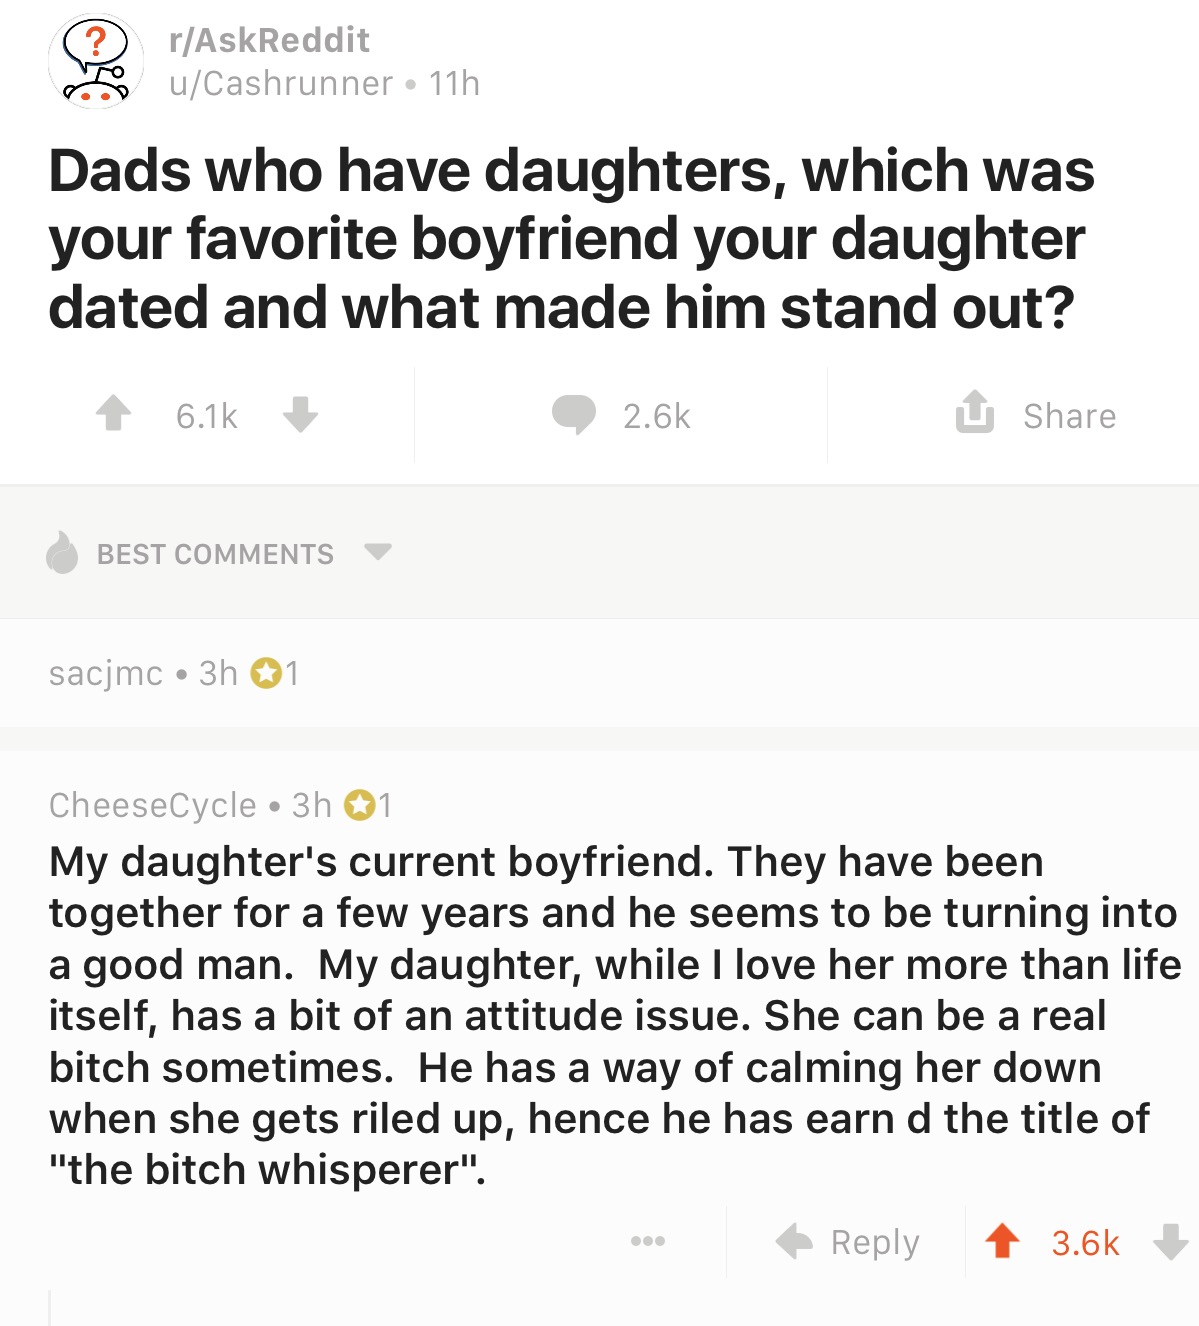 Dad who likes the daughters